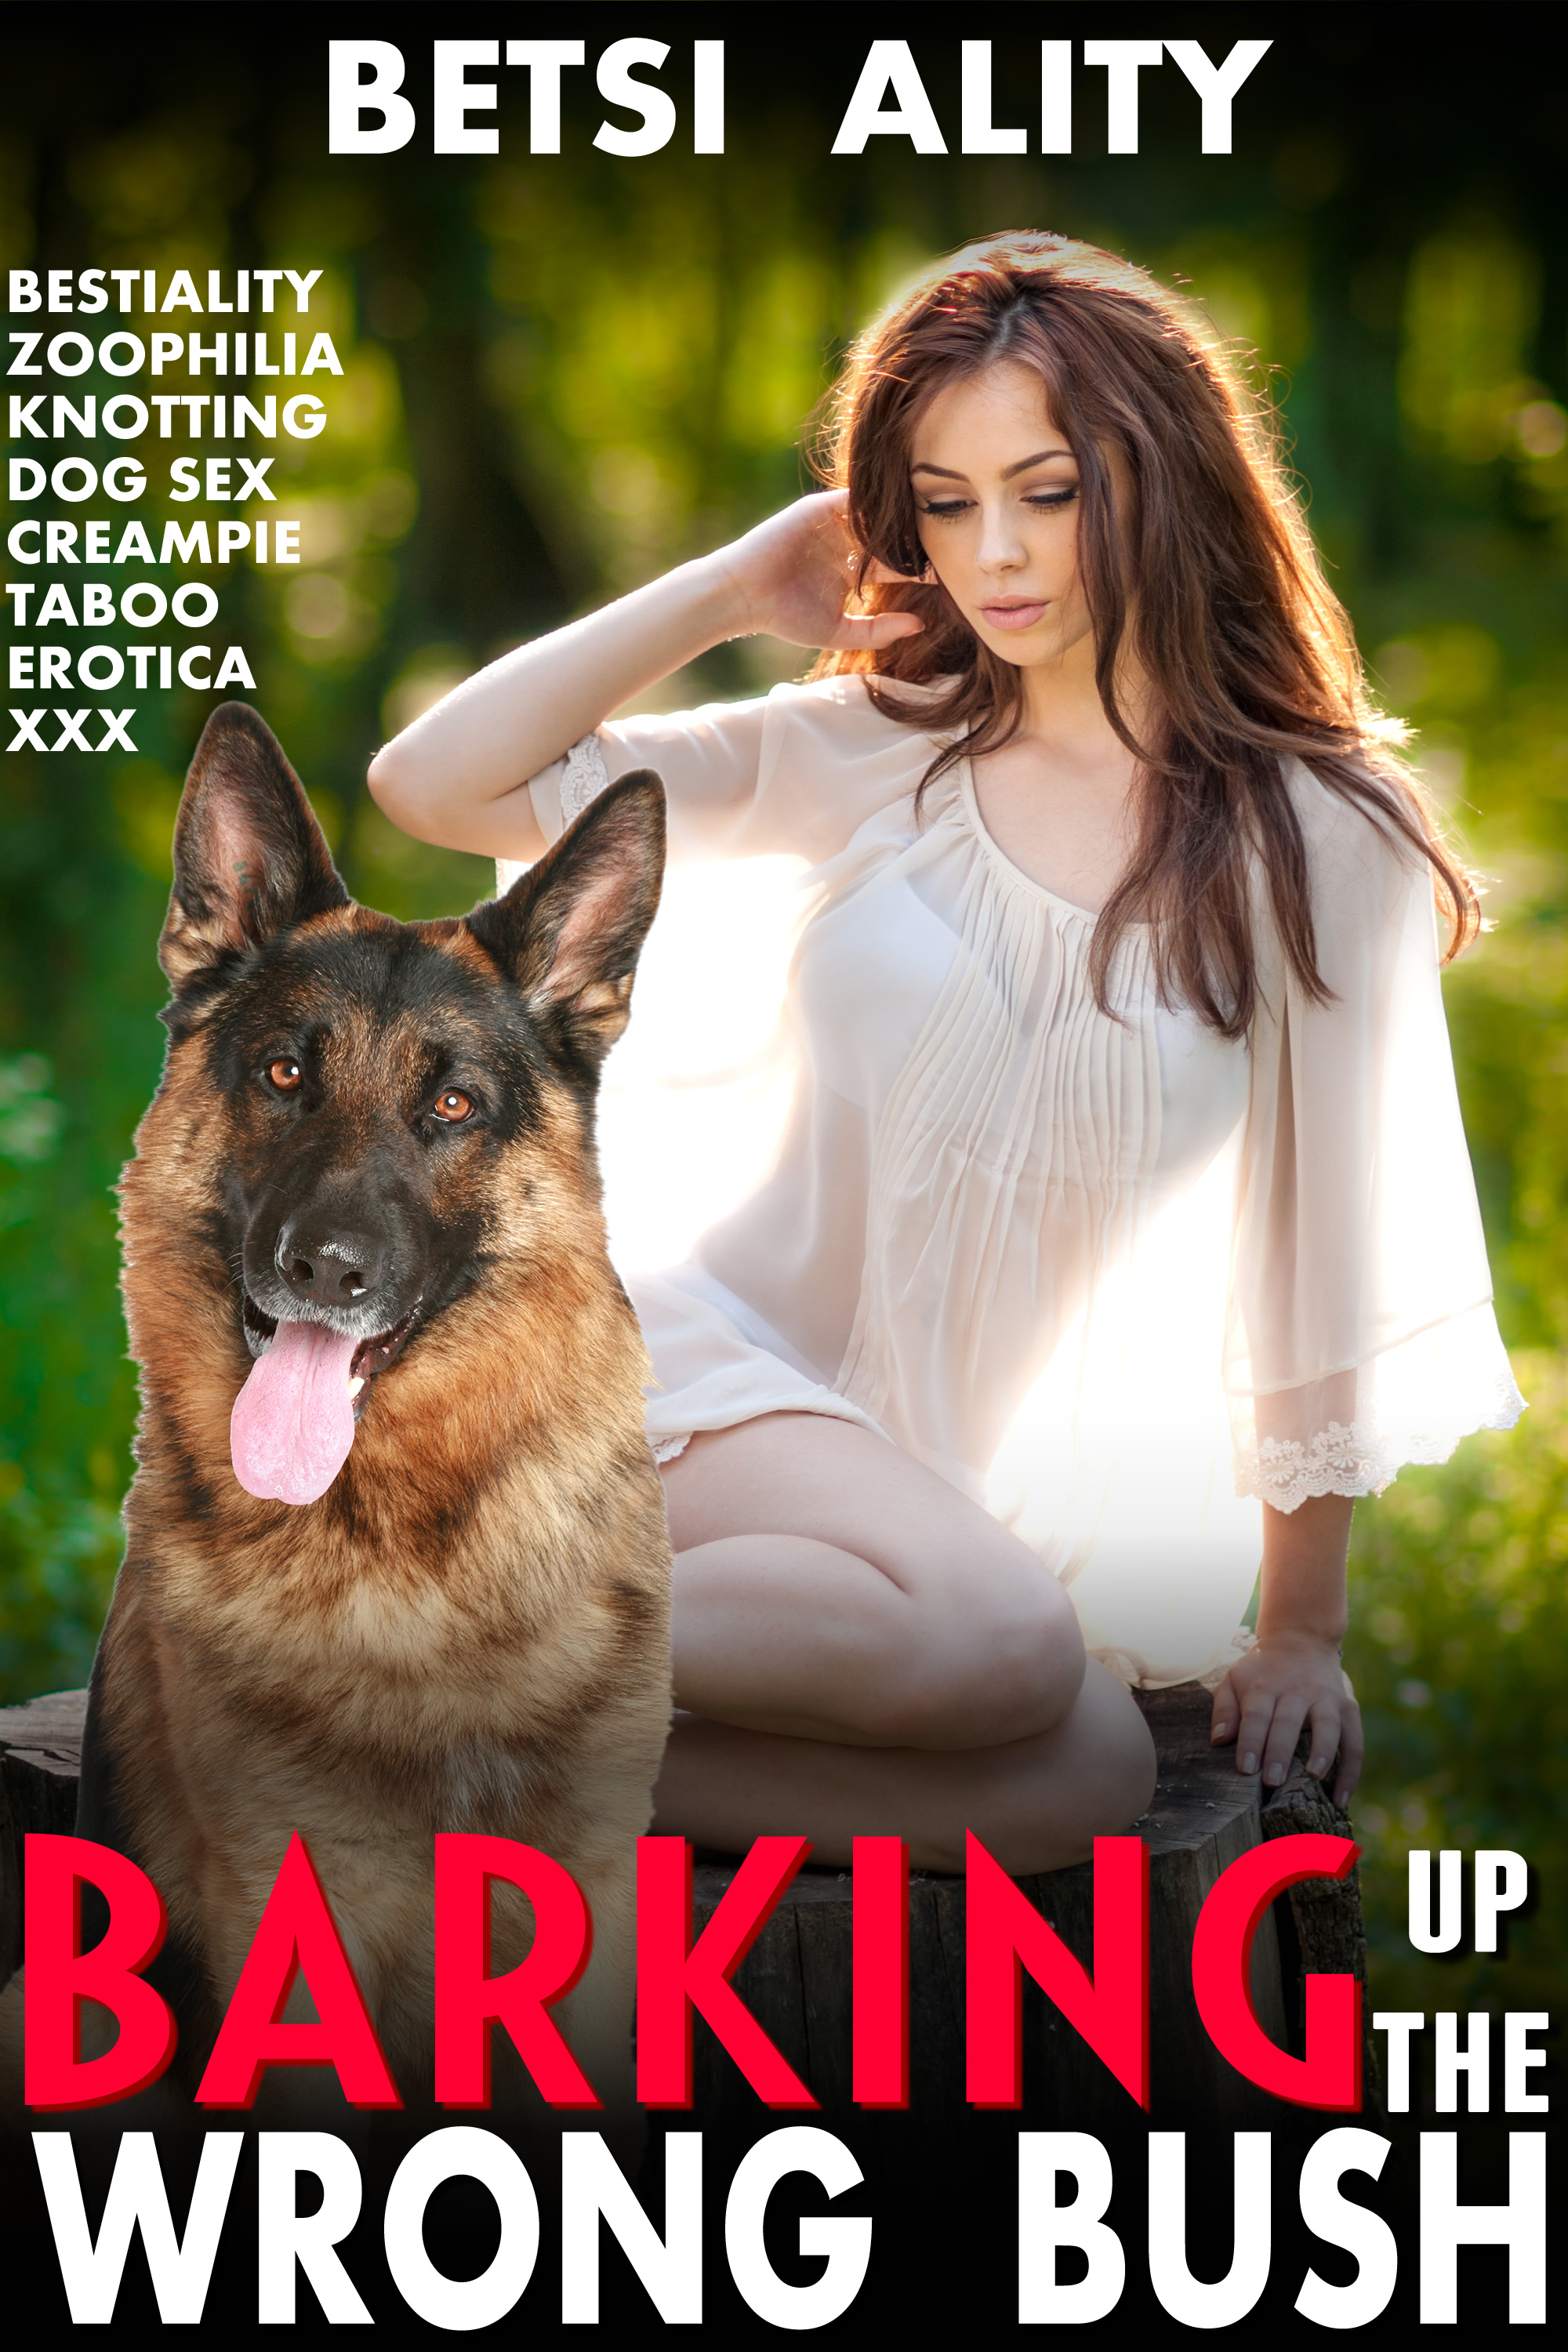 Smashwords â€“ Barking Up the Wrong Bush (Bestiality Zoophilia Knotting Dog  Sex Creampie Taboo Erotica XXX) â€“ a book by Betsi Ality